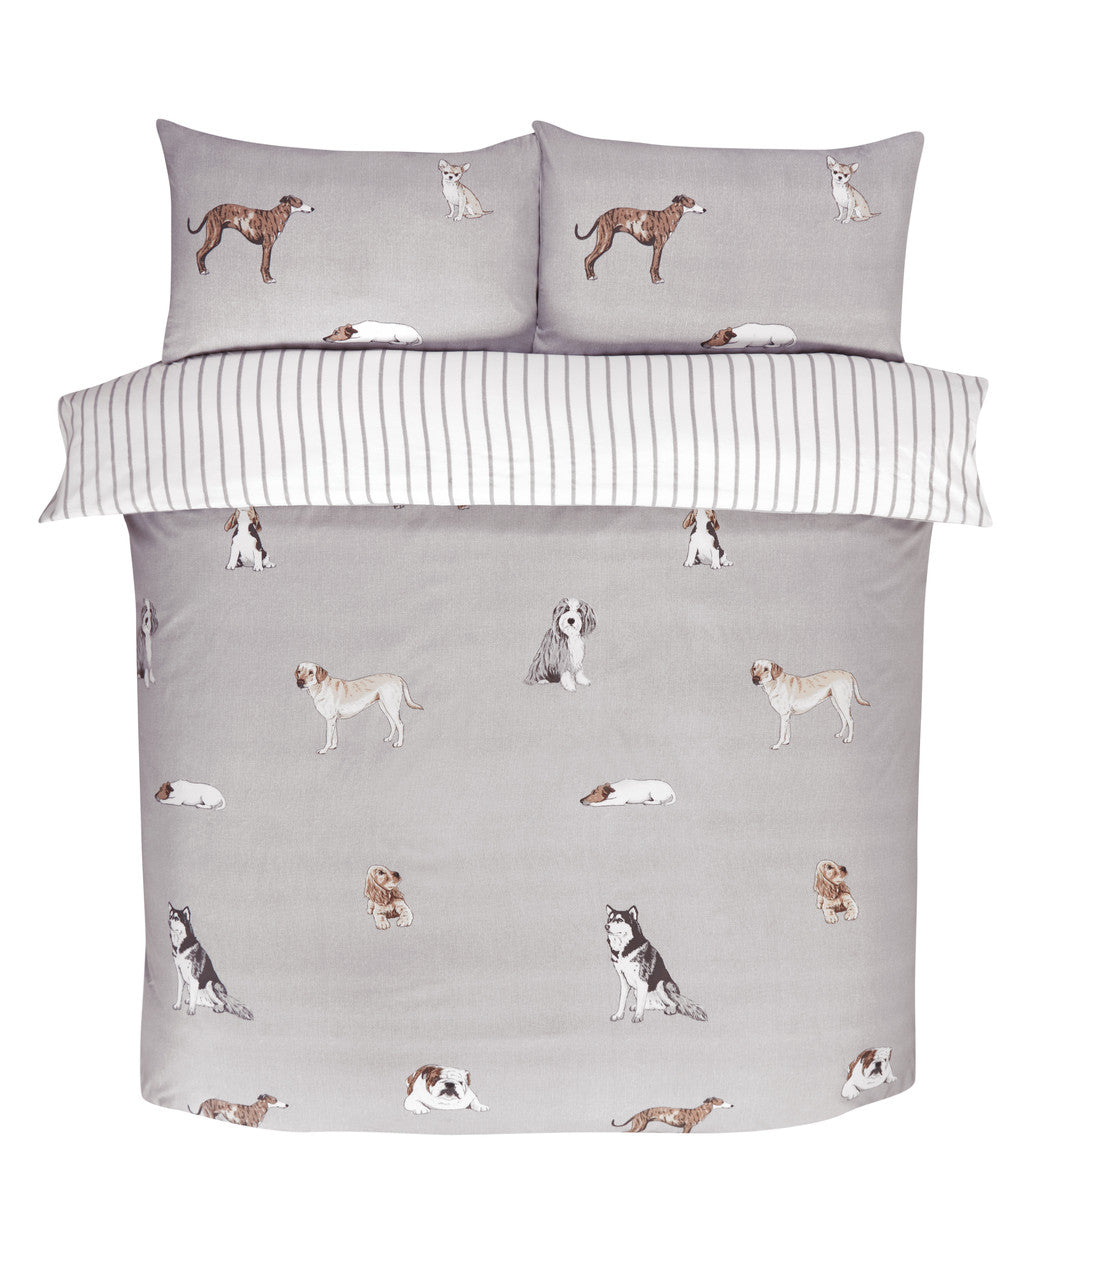 Paws and Tails (Dog) Duvet Cover Set - Single, Double & King Available